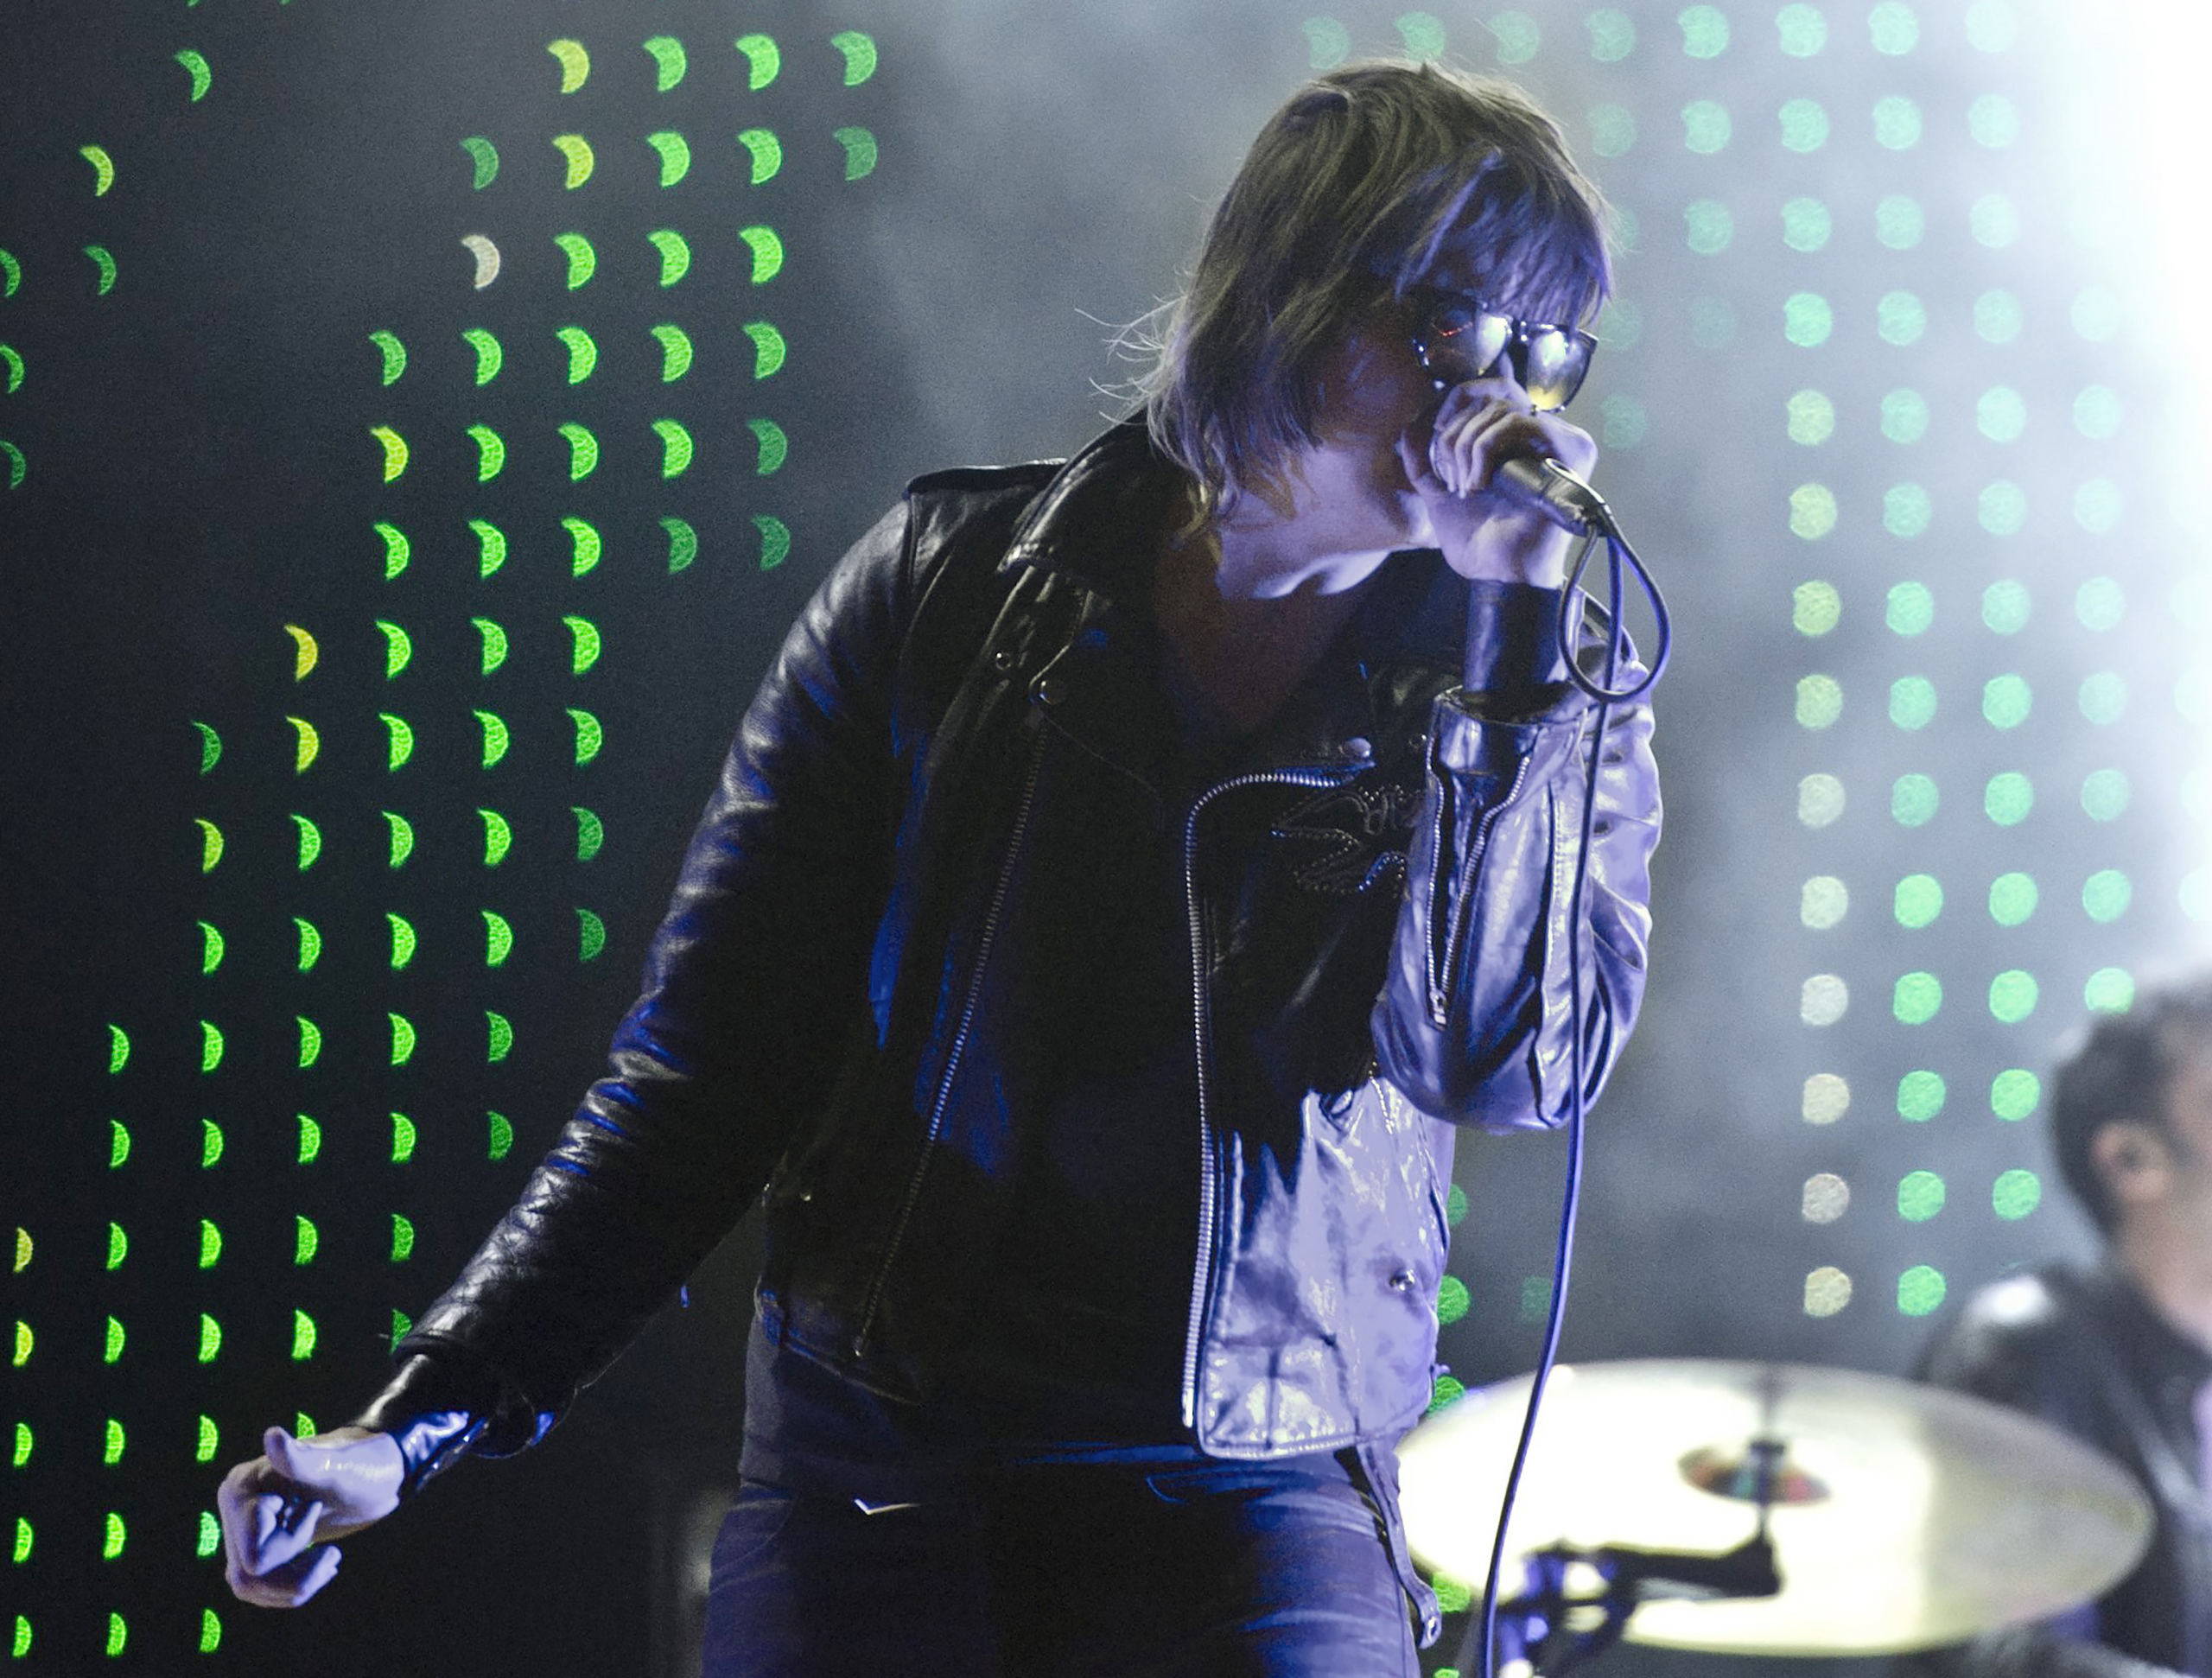 Julian Casablancas of the American rock band Strokes performs at the Peace and Love festival in Borlange, Sweden, early Saturday morning, July 2, 2011. (Fredrik Sandberg—AP)